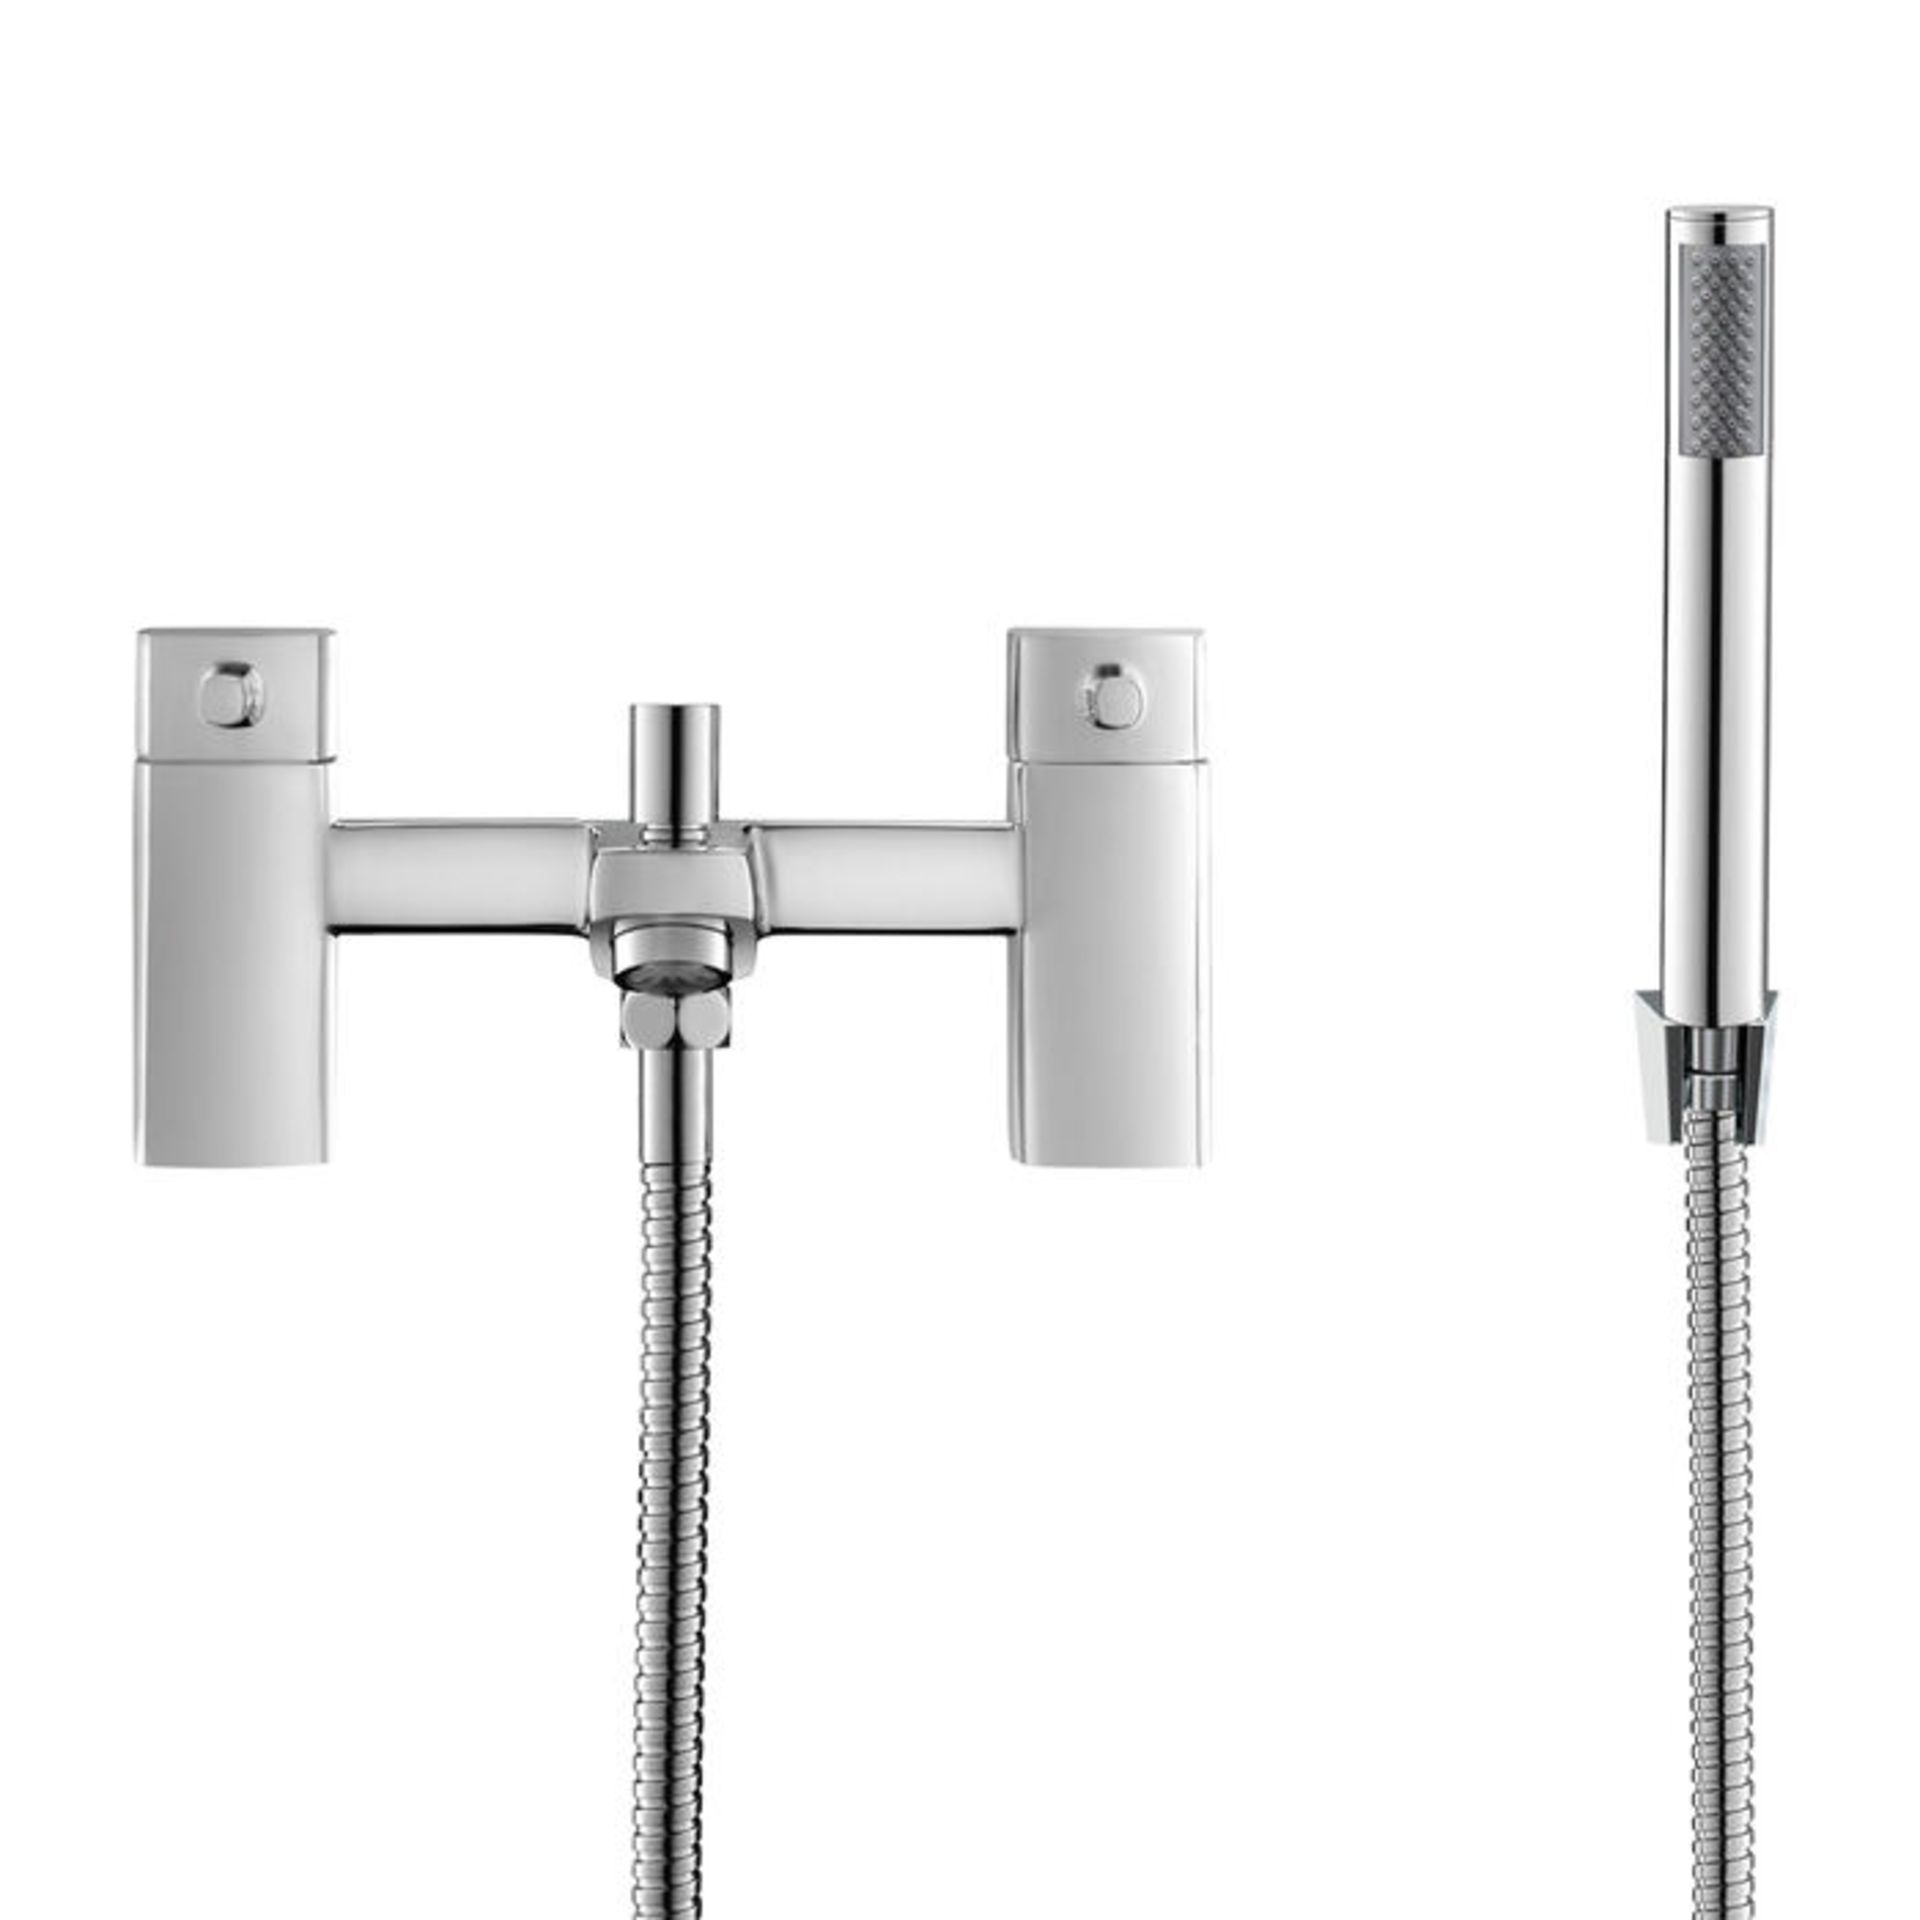 (SH1004) Avon Bath Mixer Tap & Handheld Shower Head. Chrome Plated Solid Brass 1/4 turn solid ... - Image 3 of 3